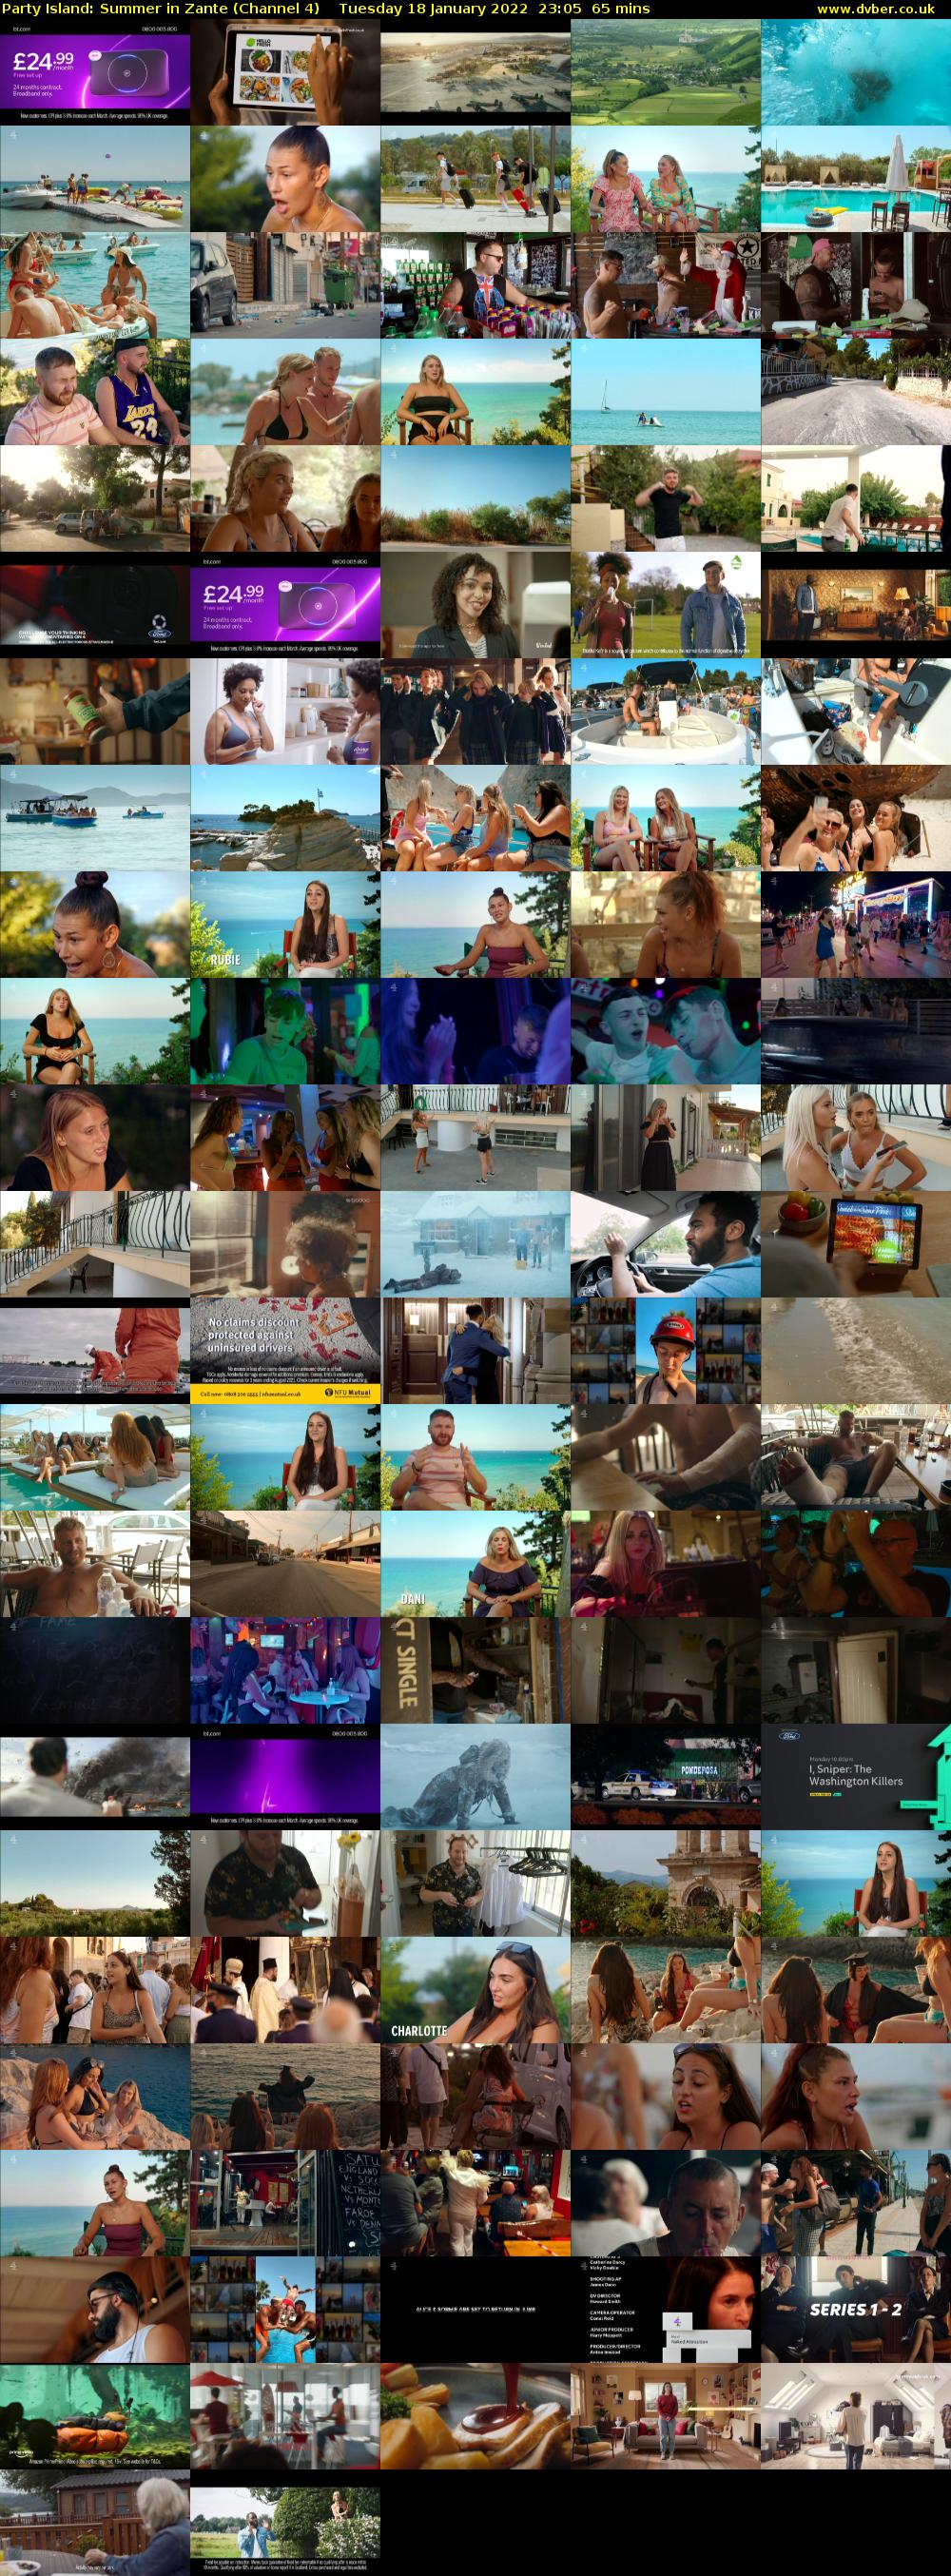 Party Island: Summer in Zante (Channel 4) Tuesday 18 January 2022 23:05 - 00:10